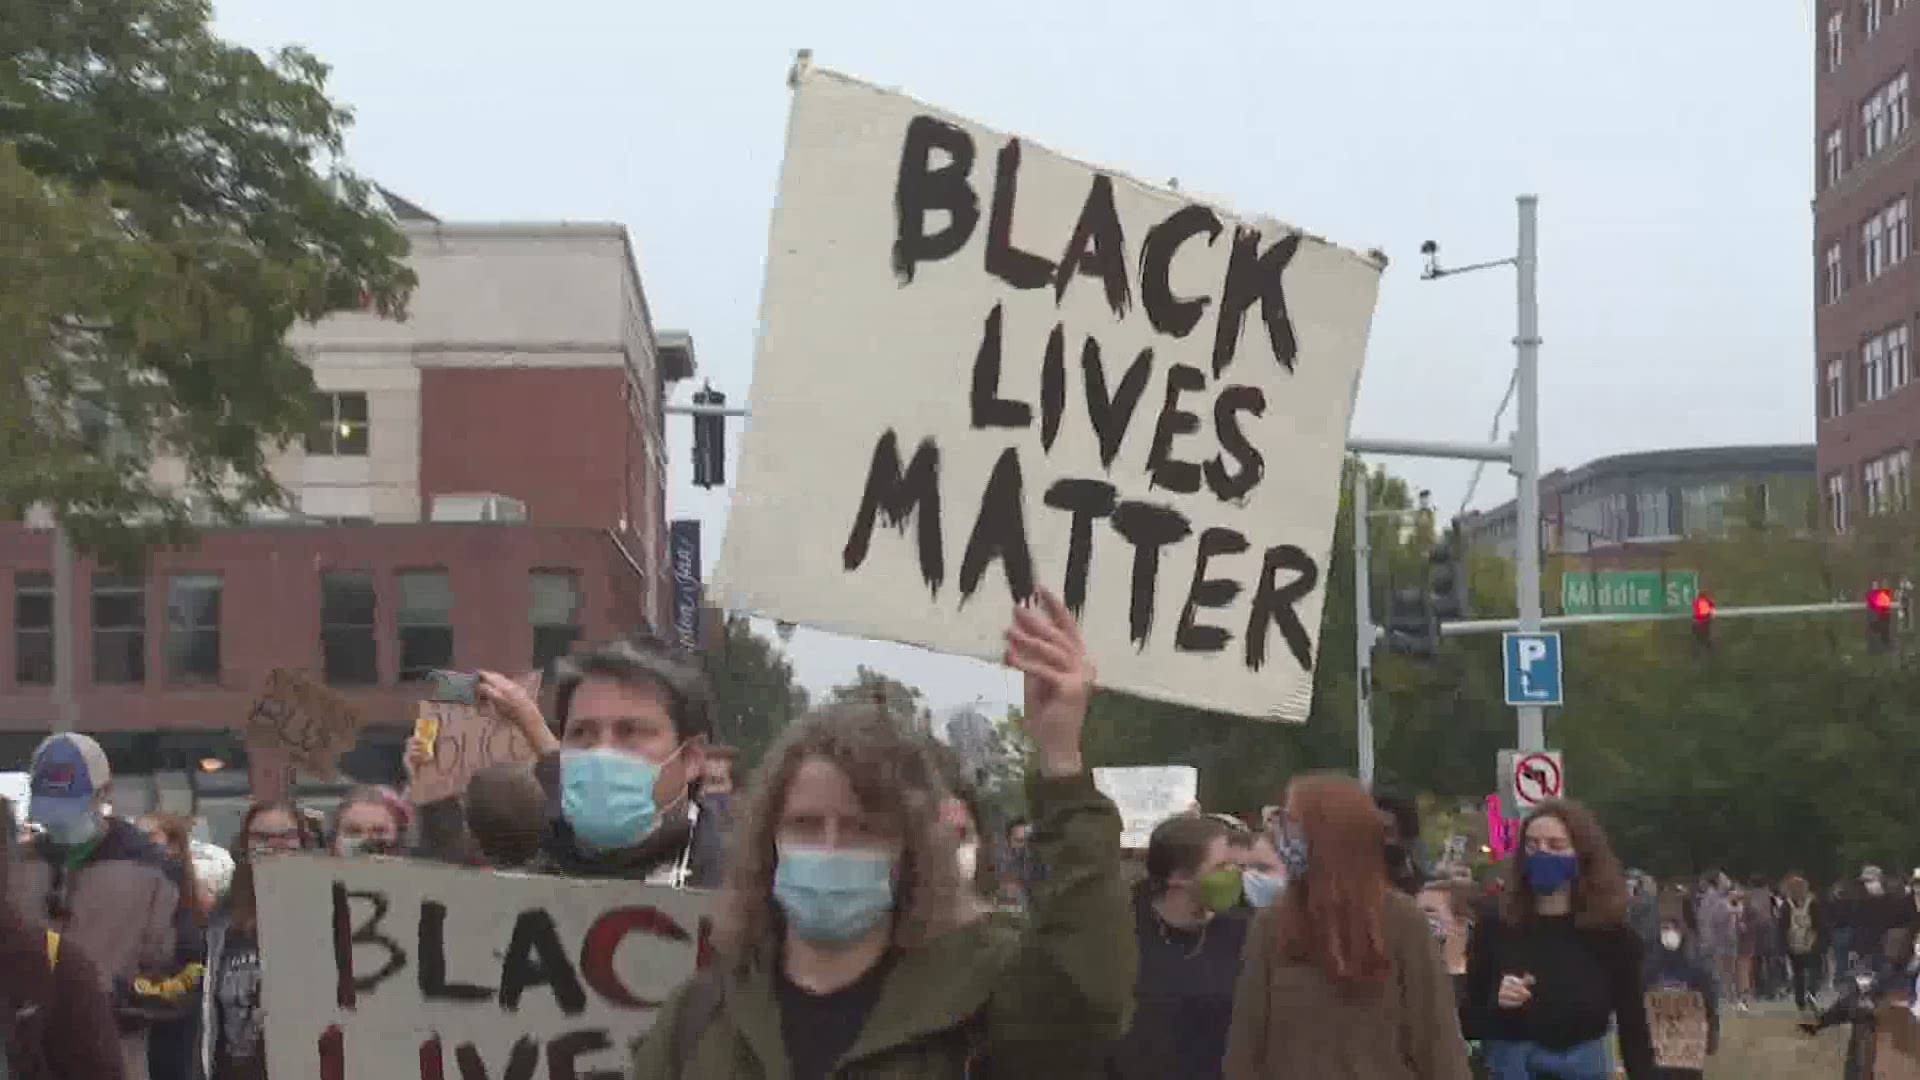 The event was peaceful, despite the fact that Portland police expressed concern last night that they had been unable to get in touch with protest organizers.